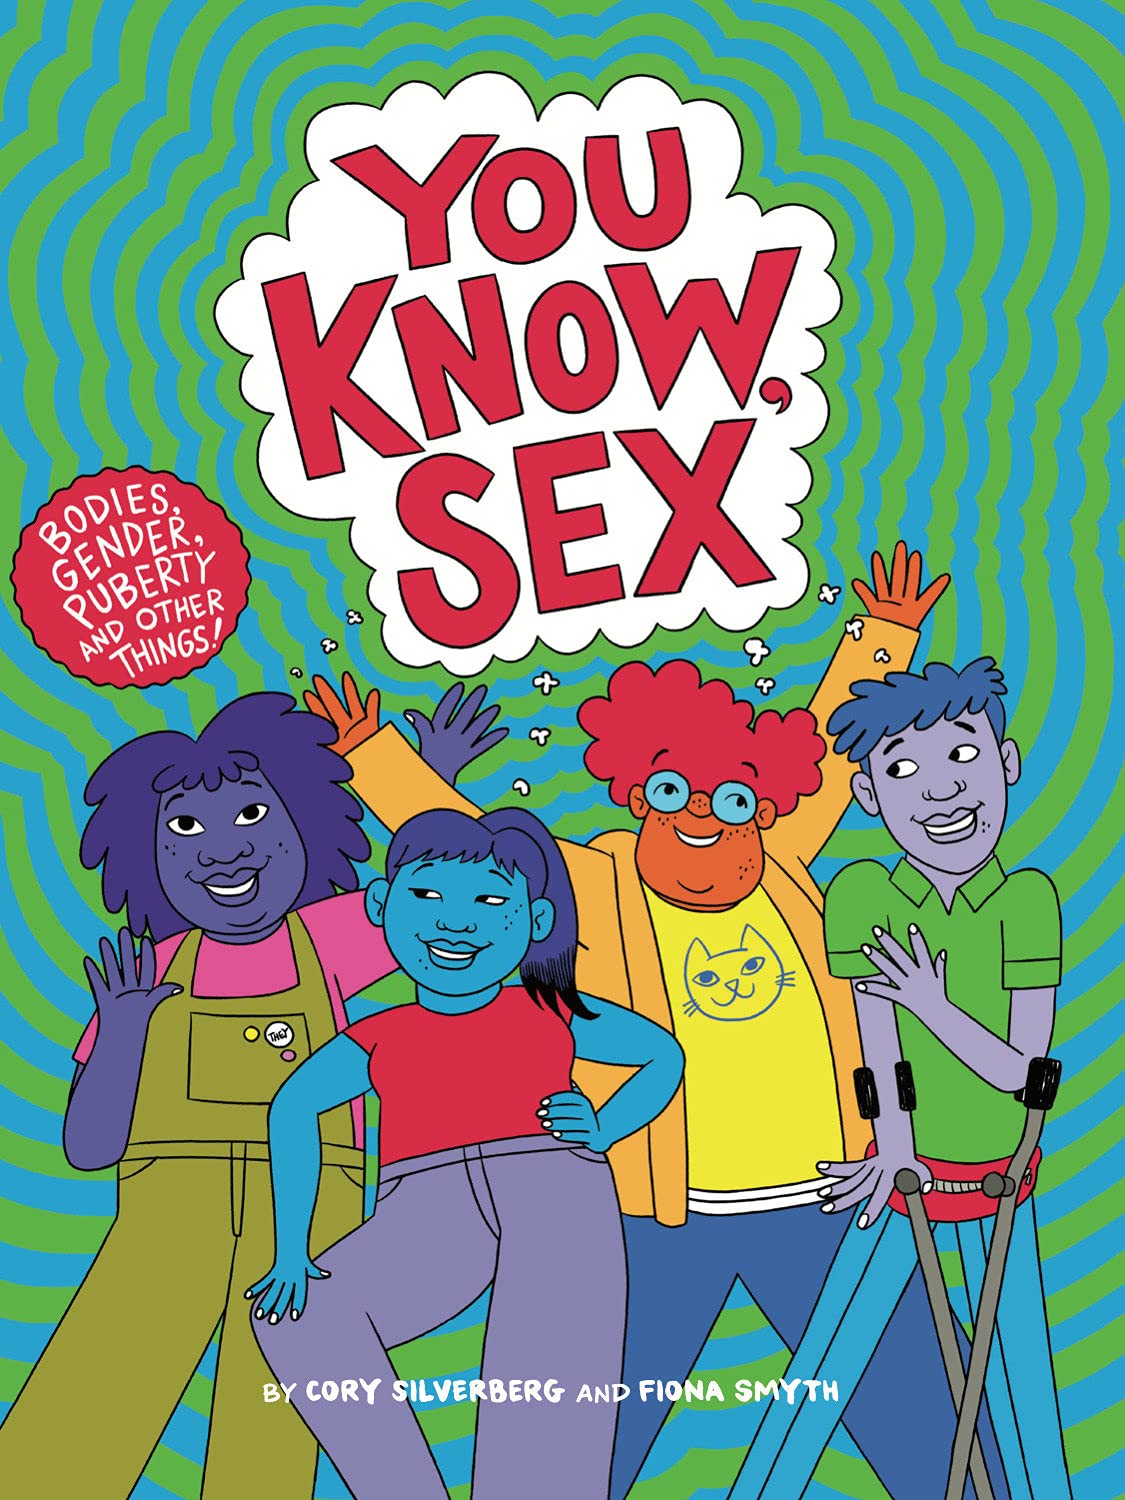 You Know Sex by Cory Silverberg and Fiona Smyth - book cover - colorful and vibrant illustration of four middle schoolers against a psychedelic blue and green background